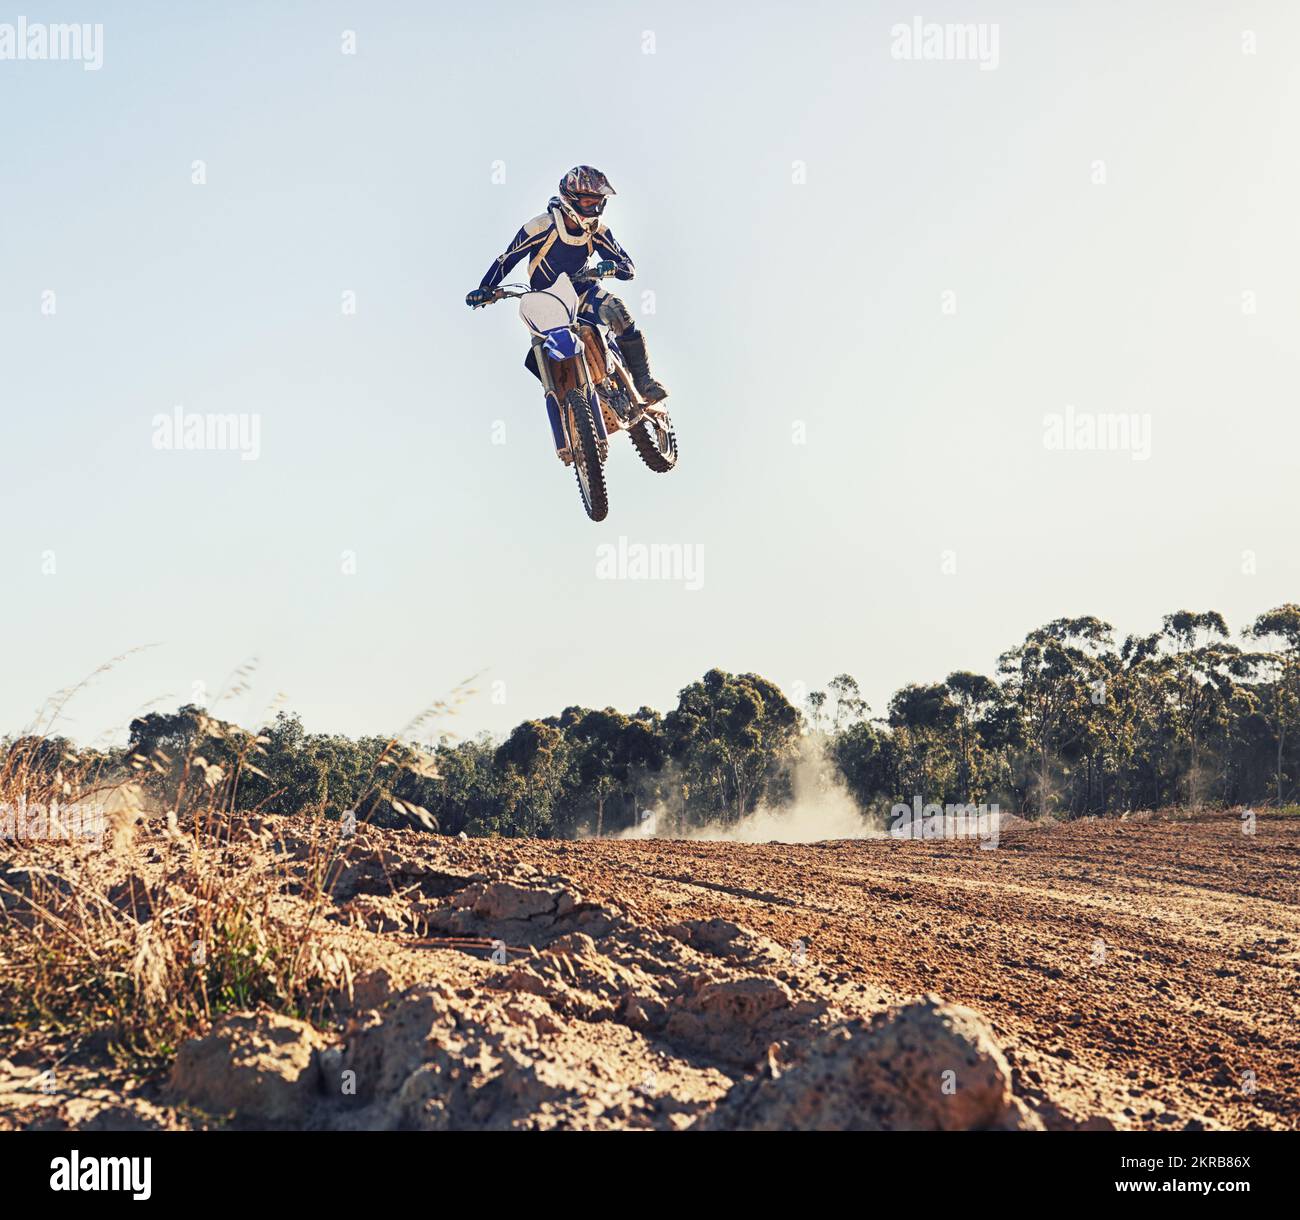 Hitting the jump at full throttle. a motocross rider coming over a jump during a race. Stock Photo